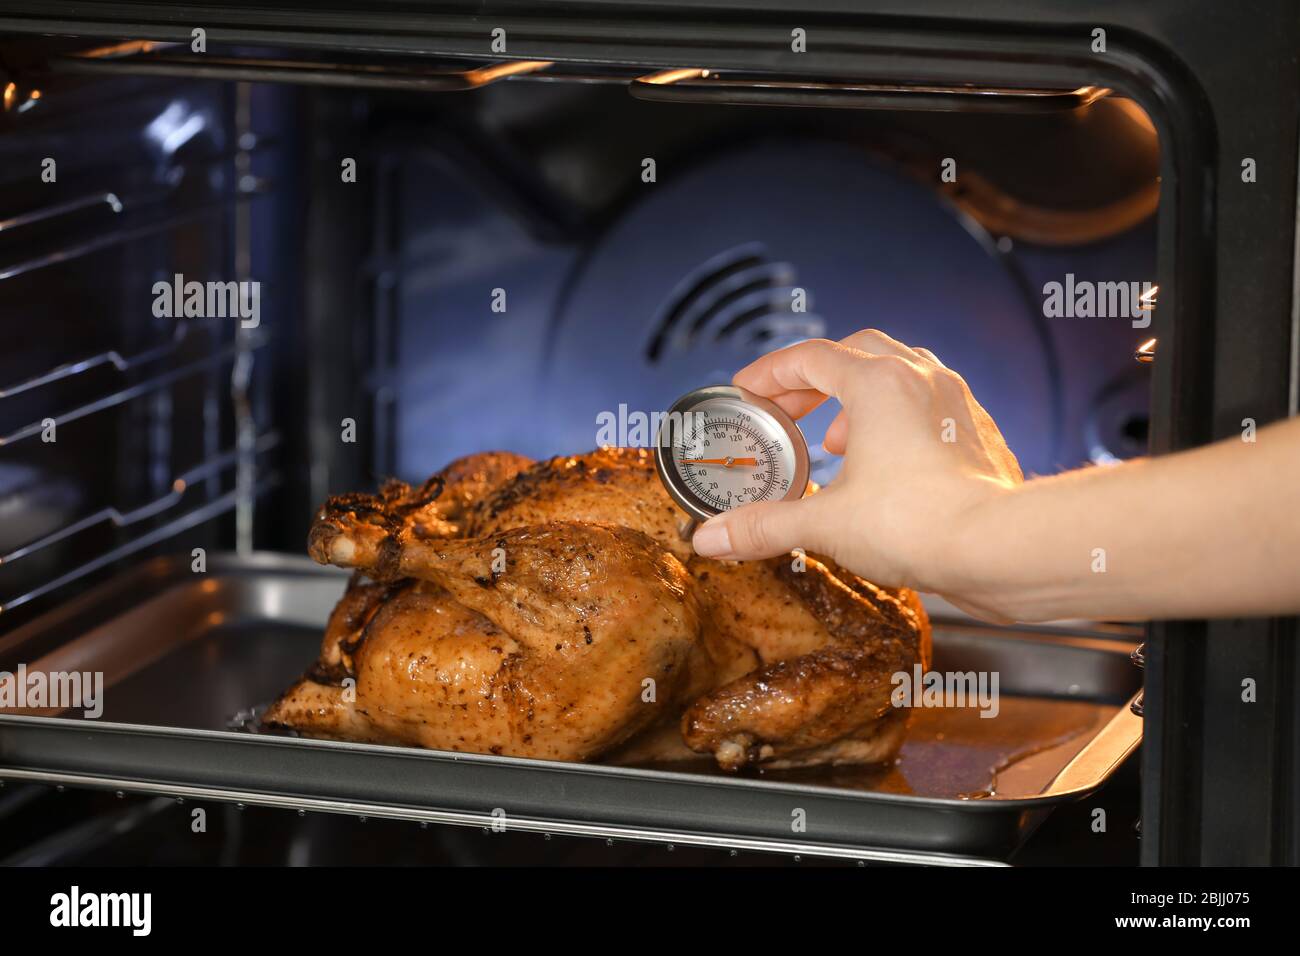 Young woman measuring temperature of whole roasted turkey with